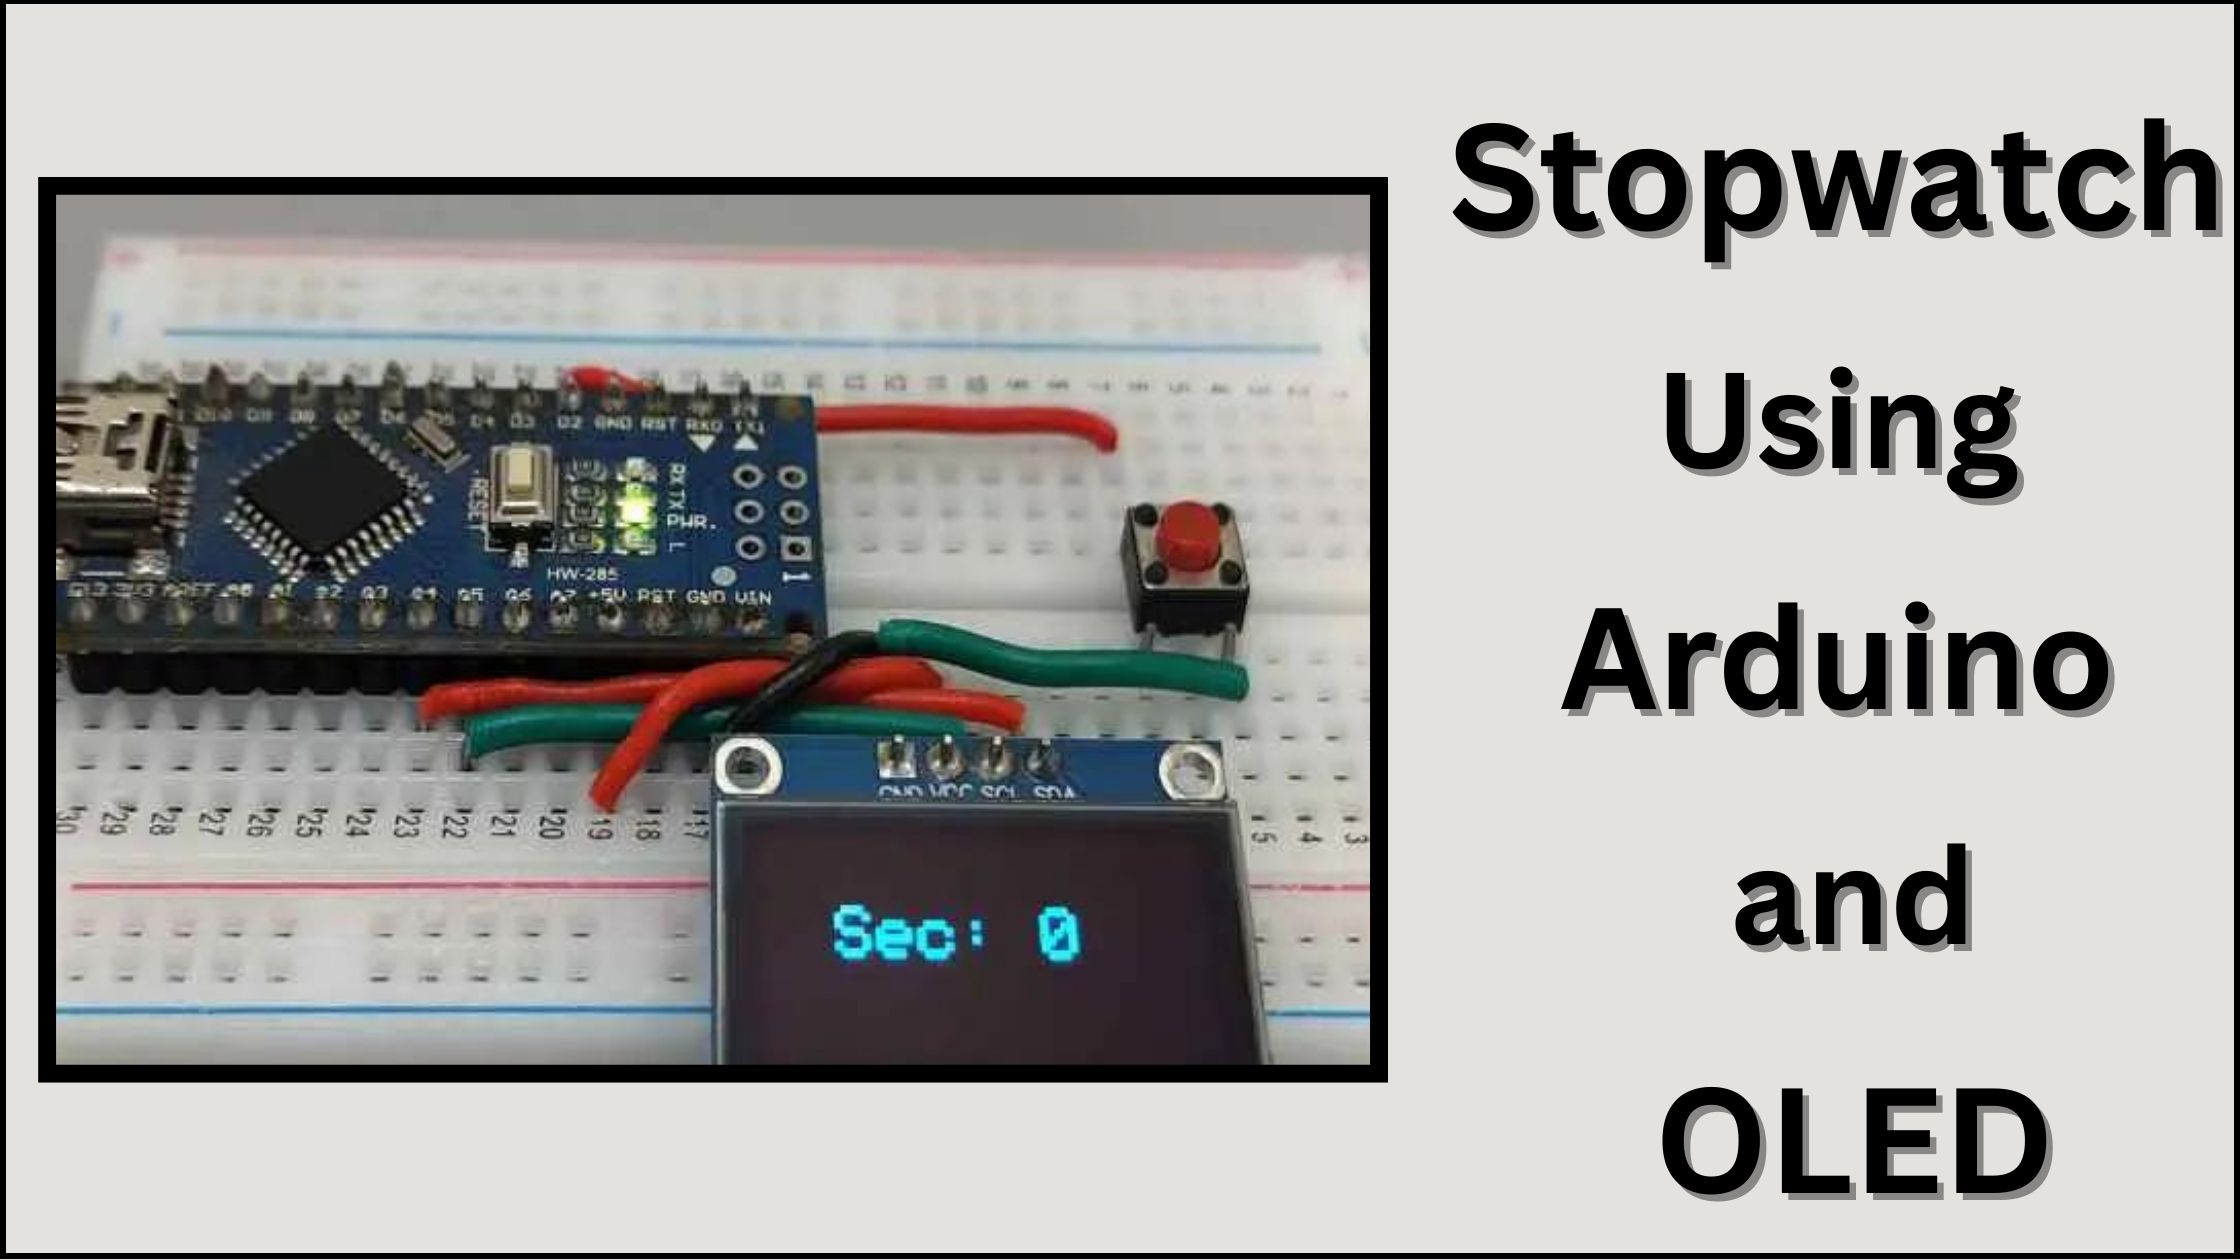 Stopwatch using Arduino and OLED